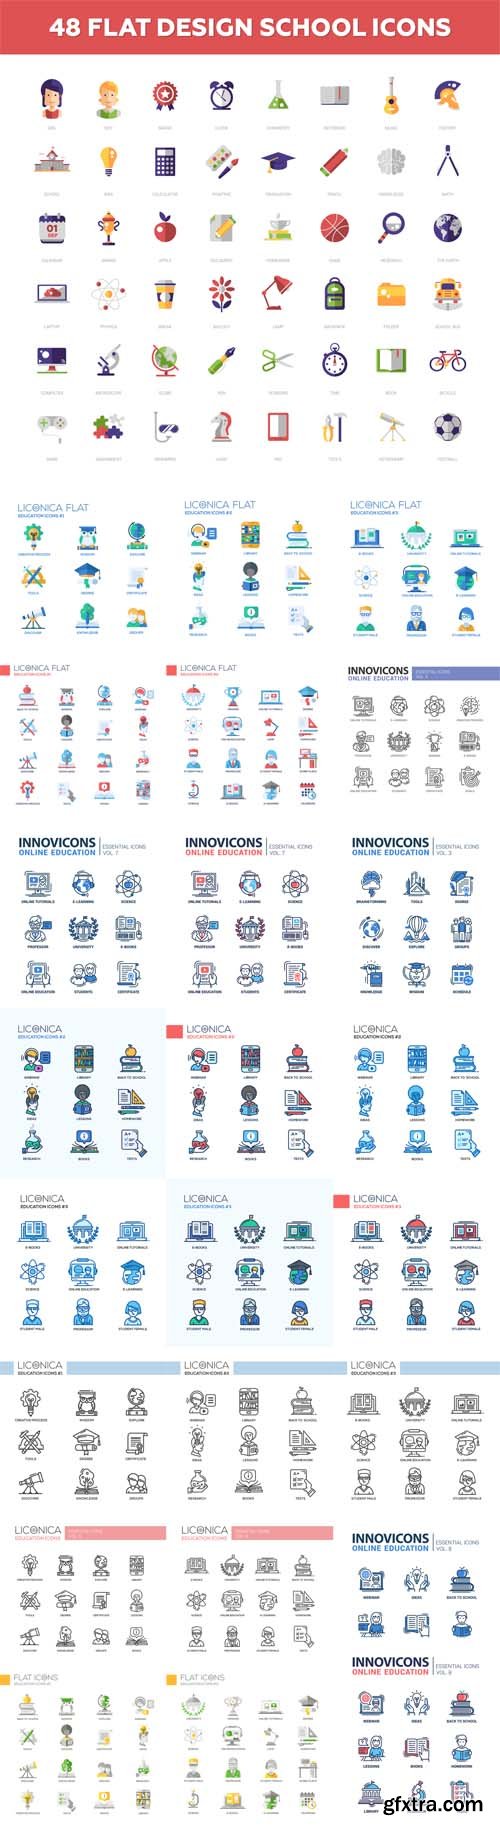 Vector Set - Modern School and Education Design Icons